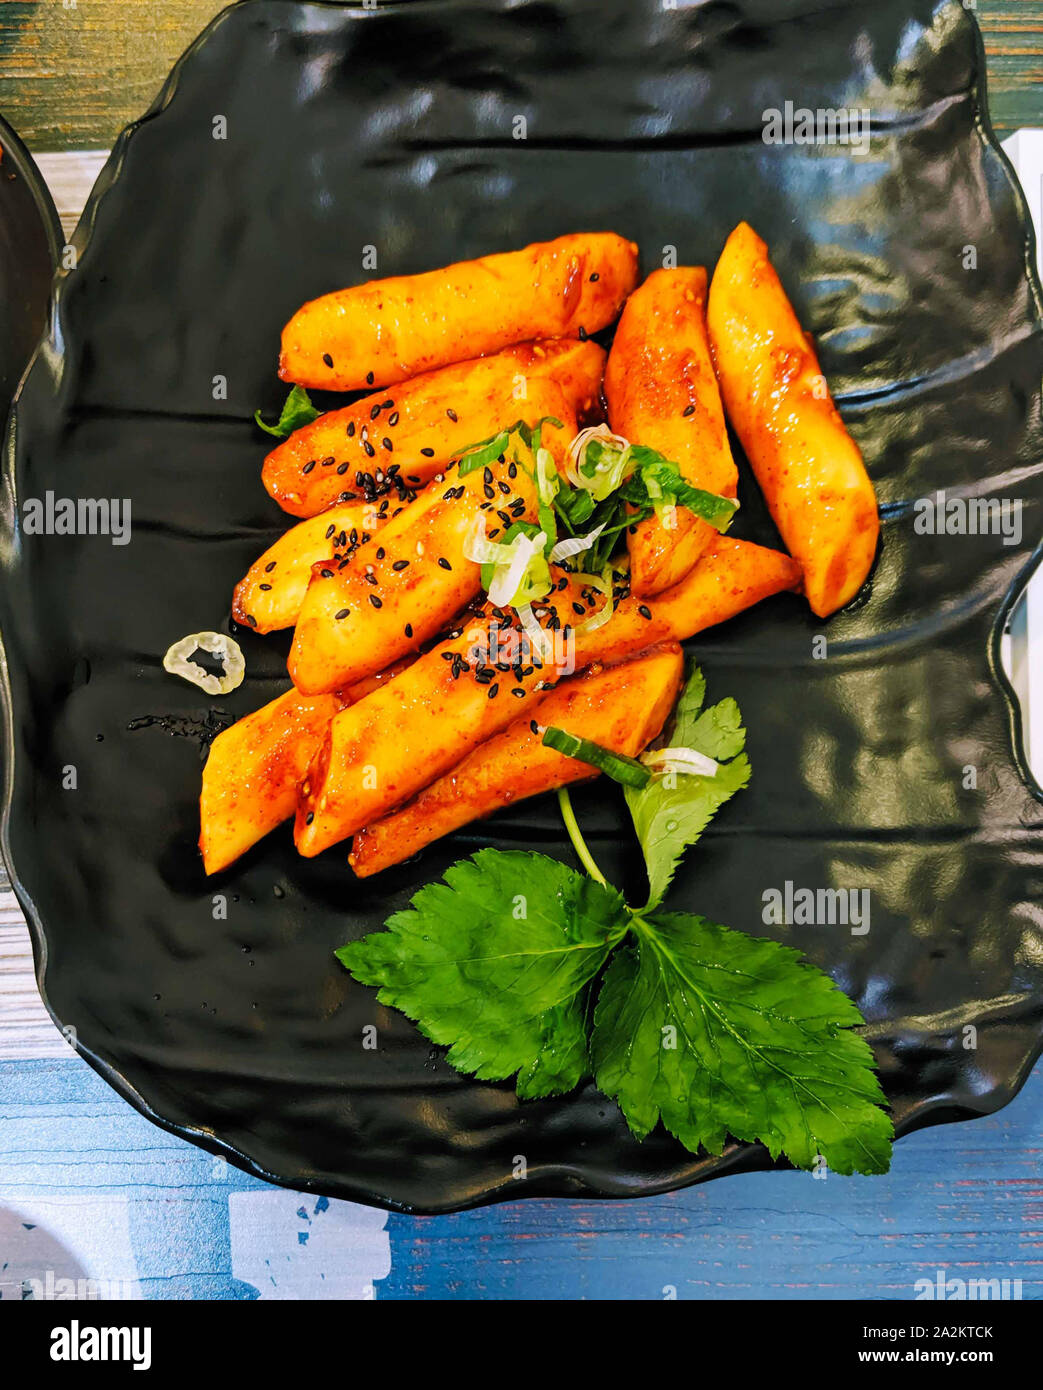 Korean penne pasta in tomato sauce with chicken, tomatoes decorated with parsley and sessame seeds on a wooden table Stock Photo